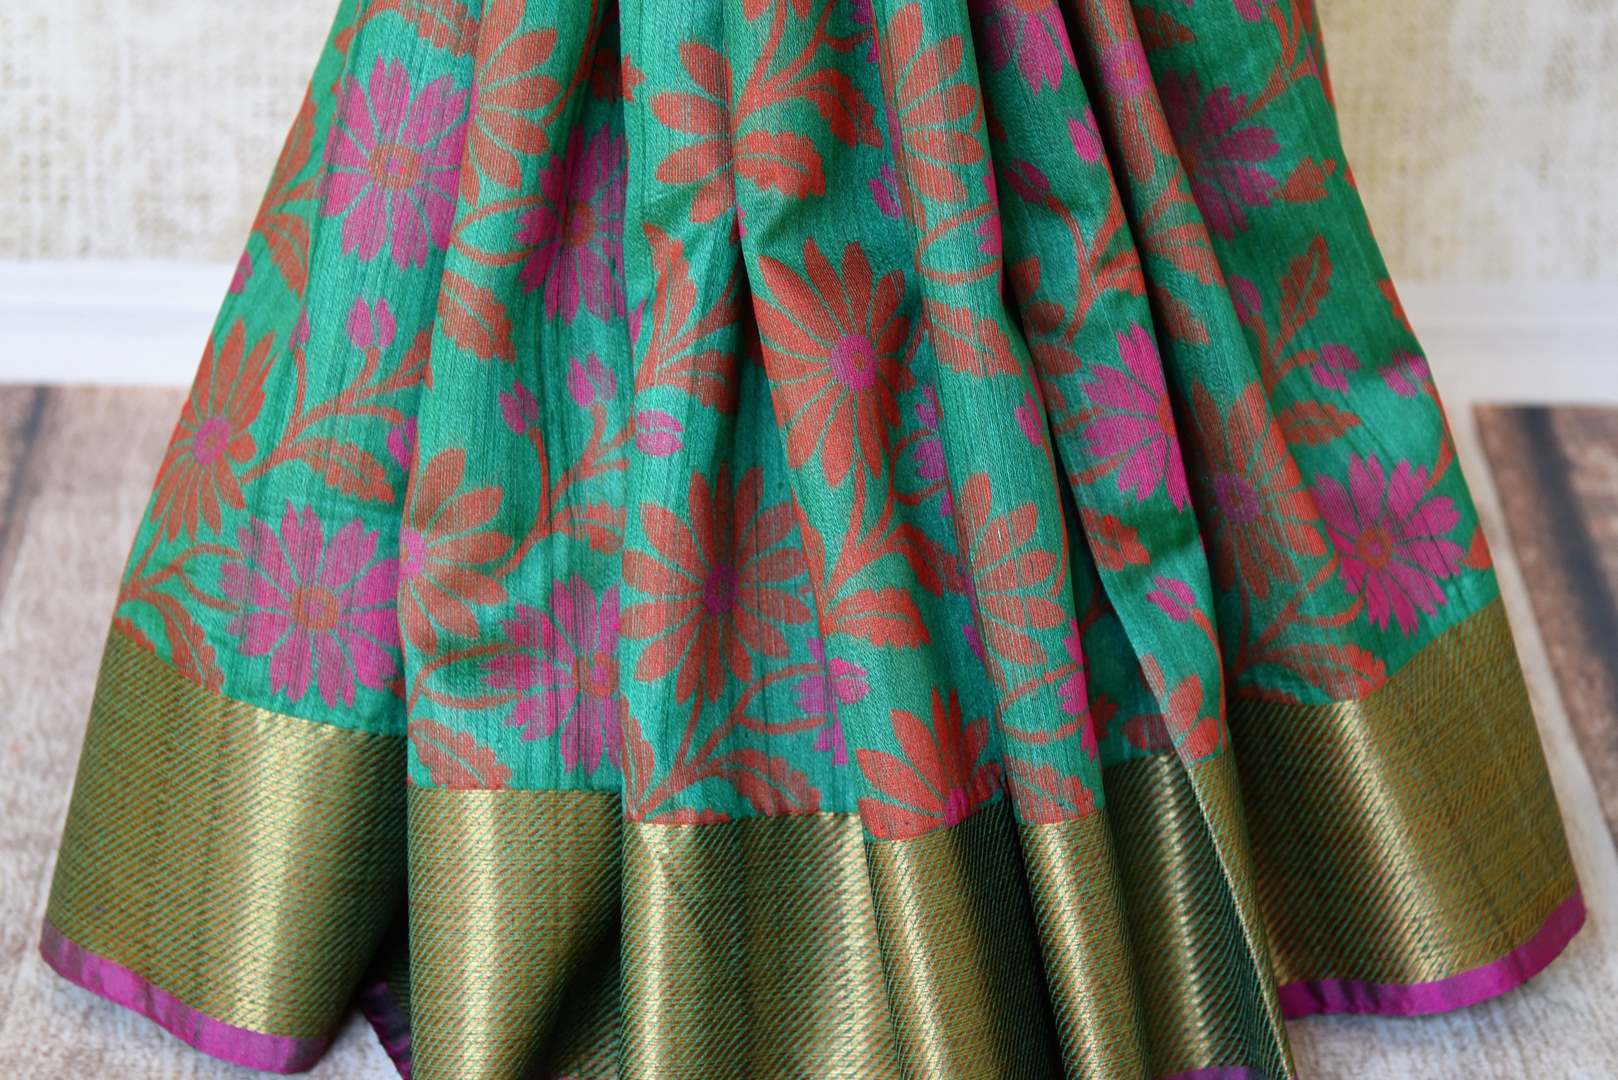 Buy green floral tussar Banarasi saree with zari border online in USA. Adorn yourself in glorious Indian sarees from Pure Elegance Indian clothing store in USA. We have an exclusive range of Indian designer sarees, traditional handloom saris, Banarasi sarees to make your Indian look absolutely captivating.-pleats